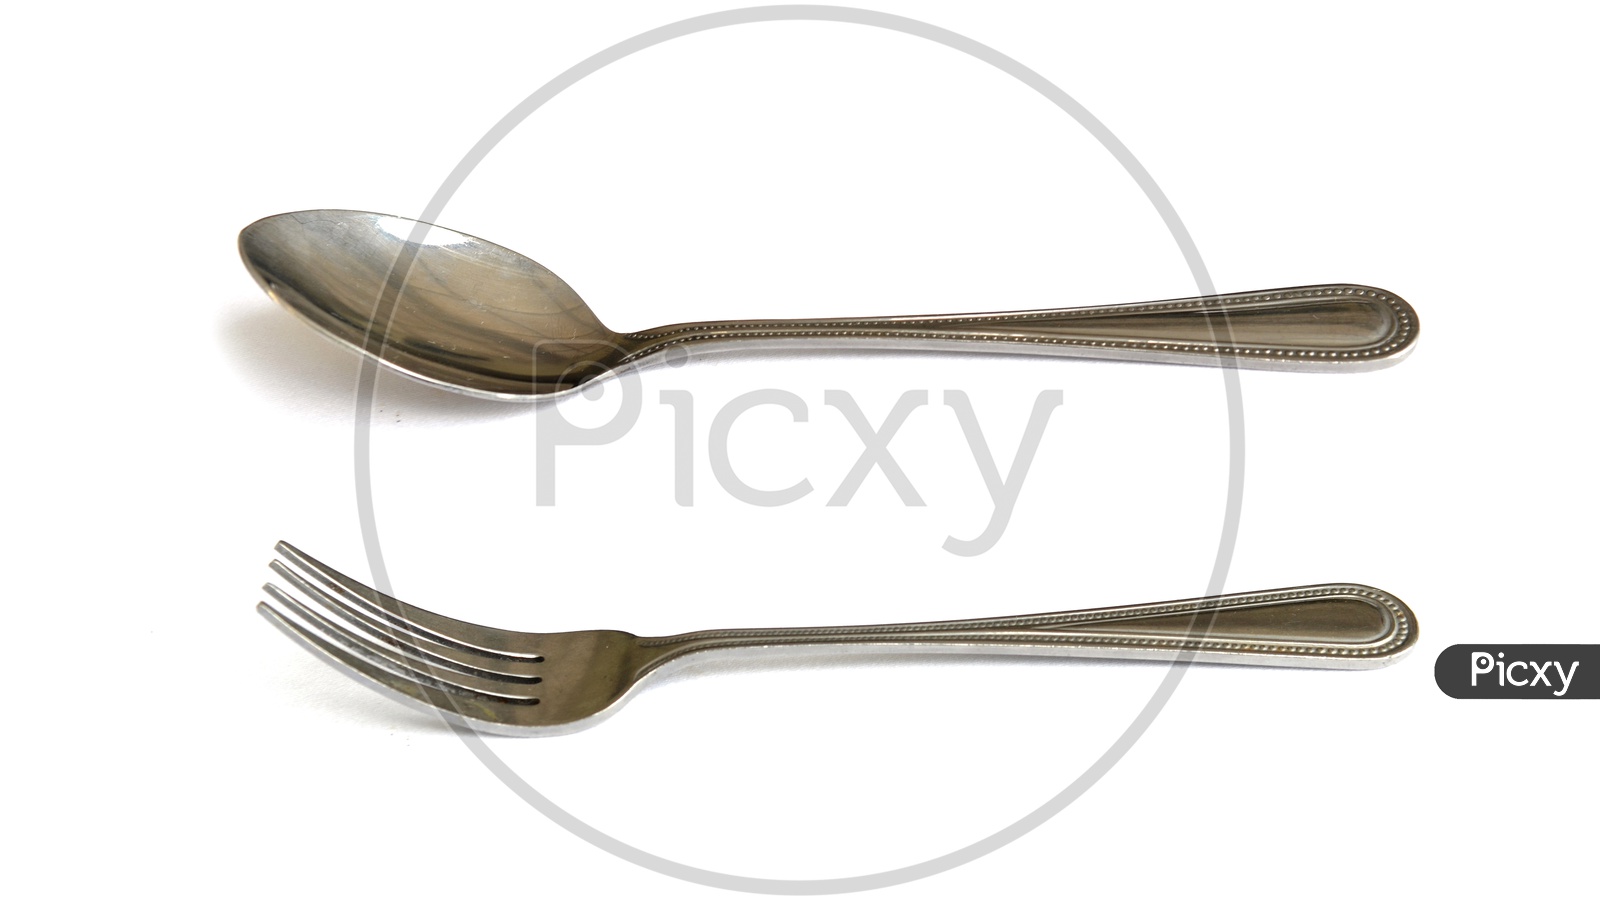 Cutlery: spoon, fork. Isolated on white background